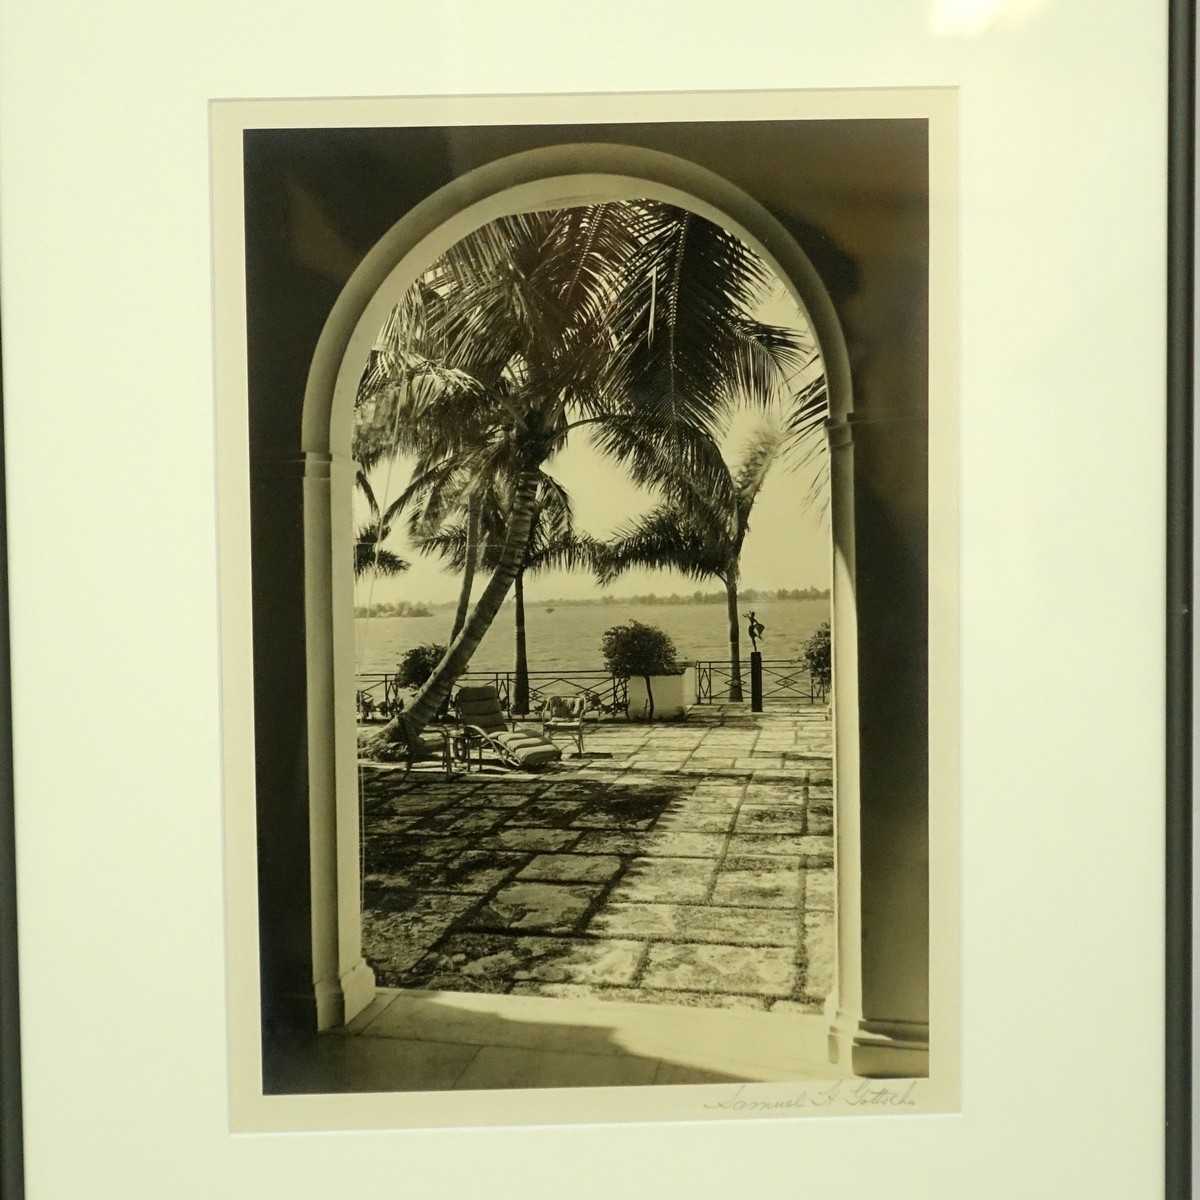 Two (2) Works by Samuel Gottscho, American (1875 - 1971) Black and White Silver Gelatin Prints of Two Distinctive Outdoor Scenes, Each Signed in Pencil Lower Right. Good condition.